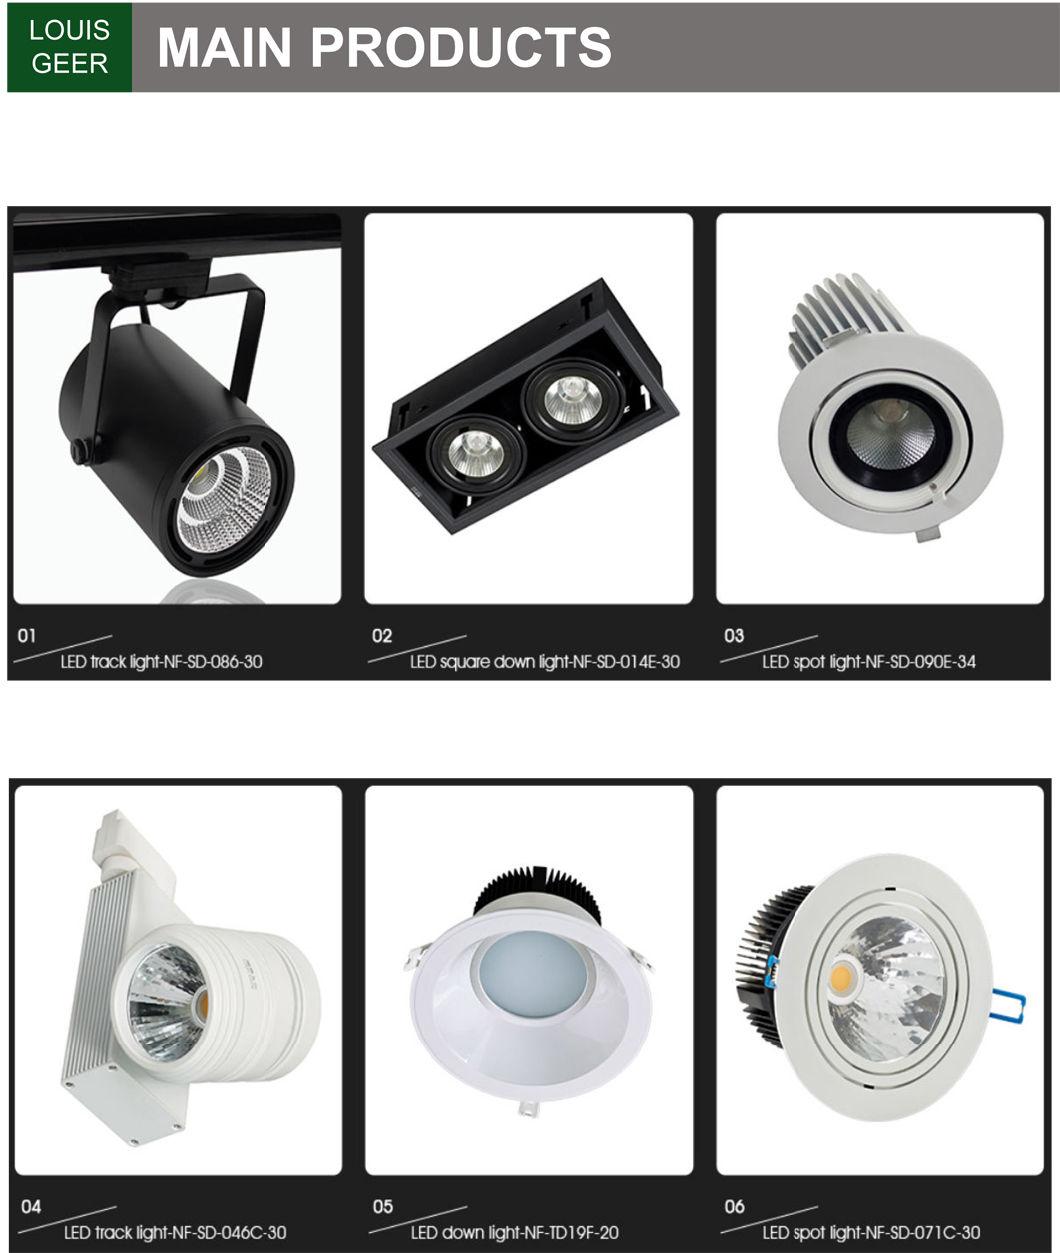 Recessed Triple Heads LED Grille Light Decorative 36W 45W Ceiling Lights for Residential